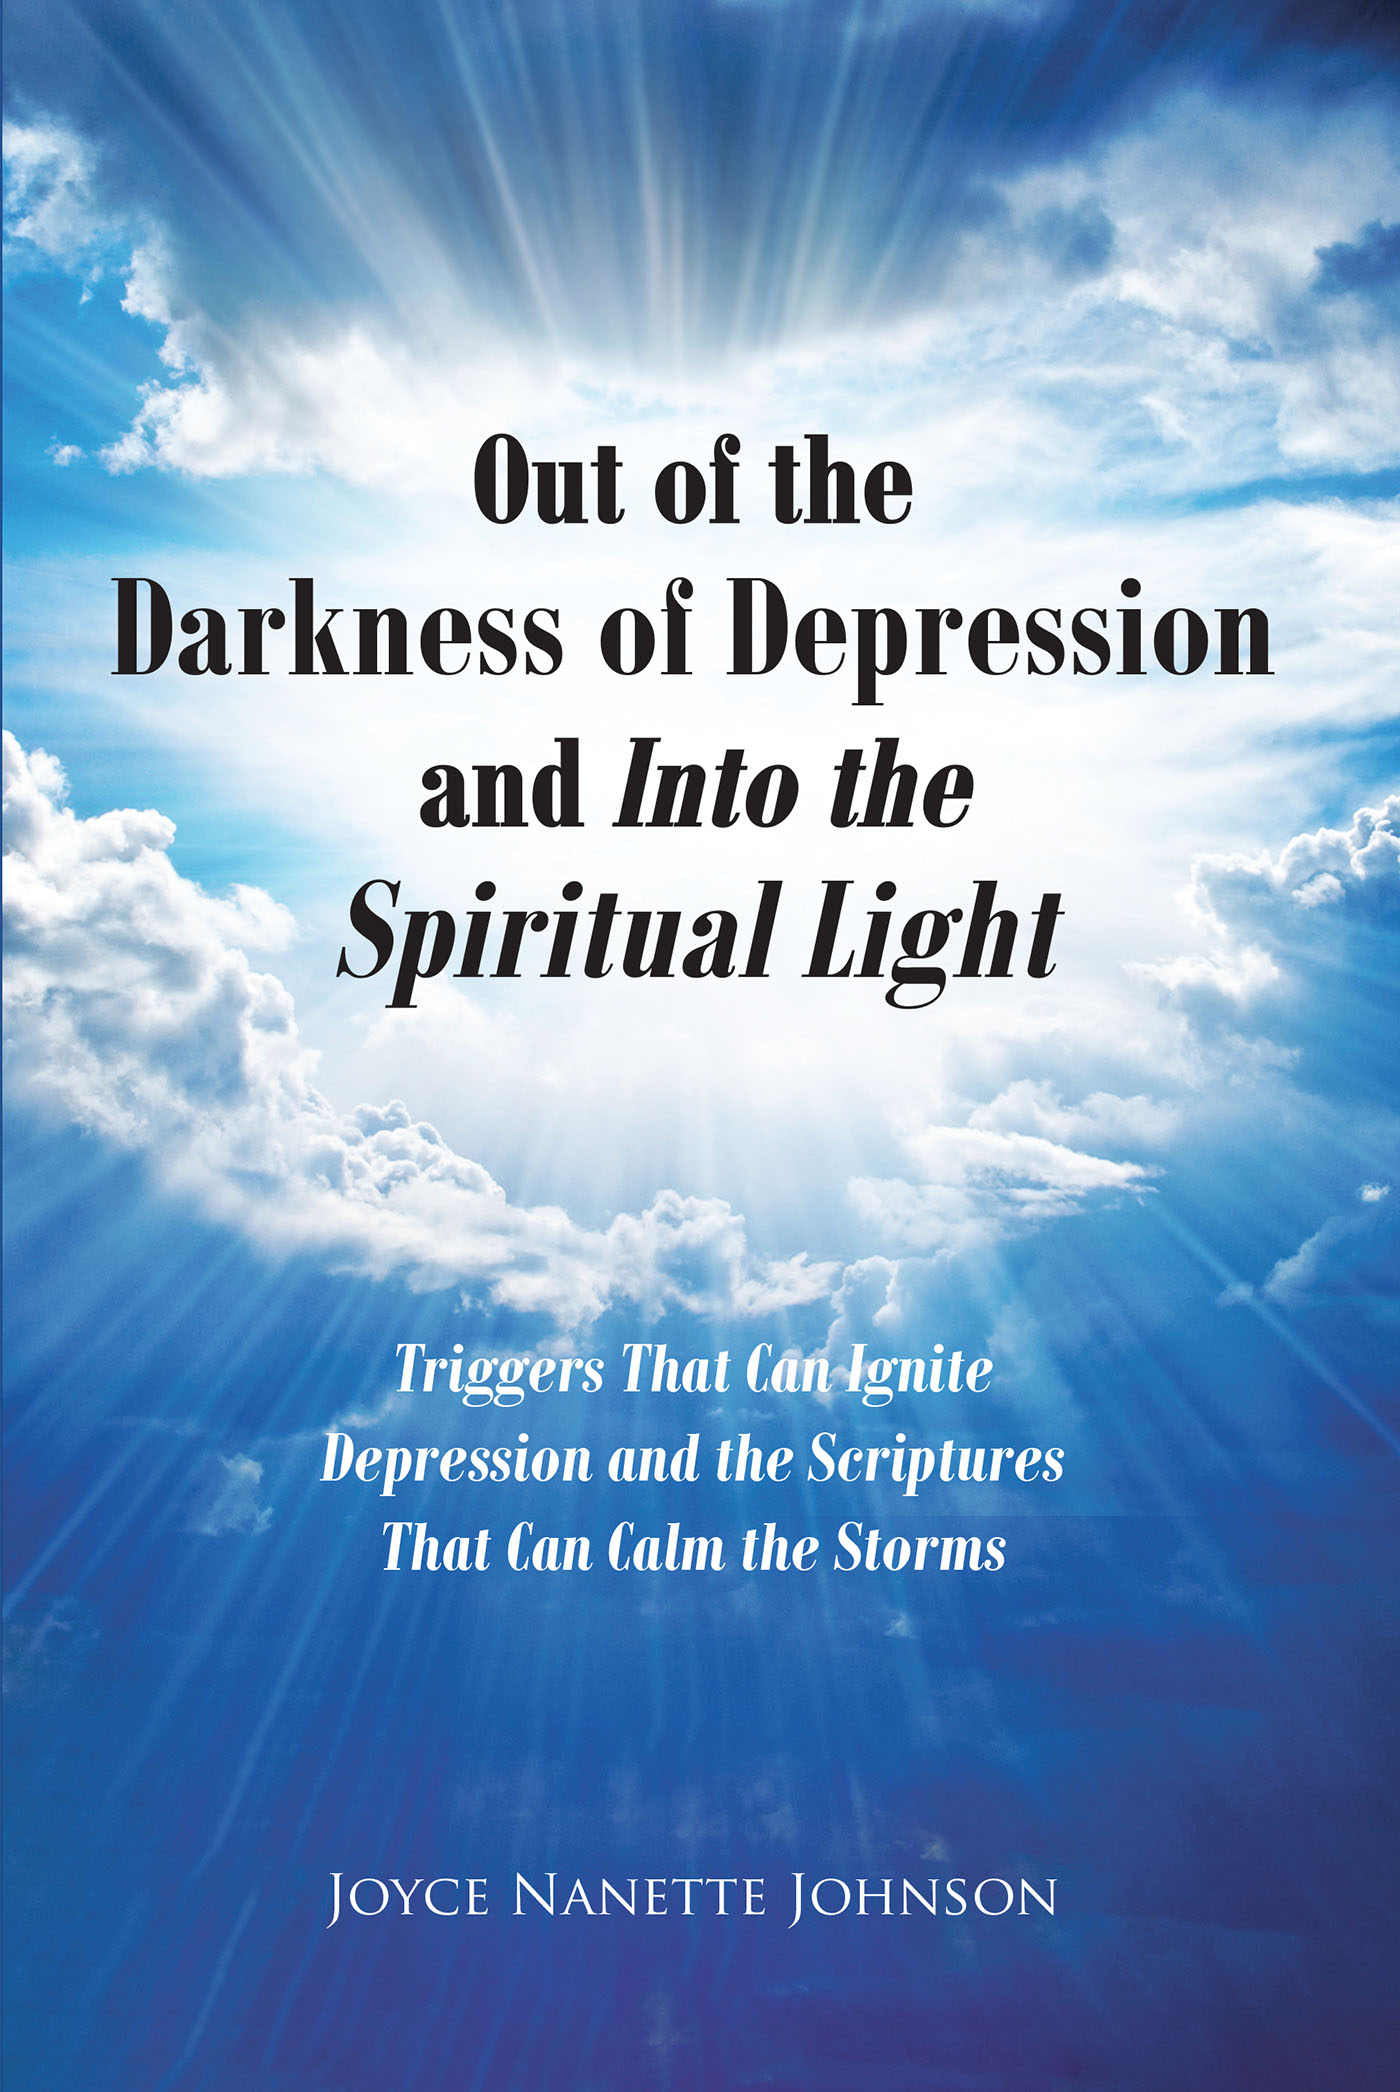 Joyce Nanette Johnson’s Newly Released “Out of the Darkness of Depression and Into the Spiritual Light” is an Encouraging Message of Hope for Depression Sufferers